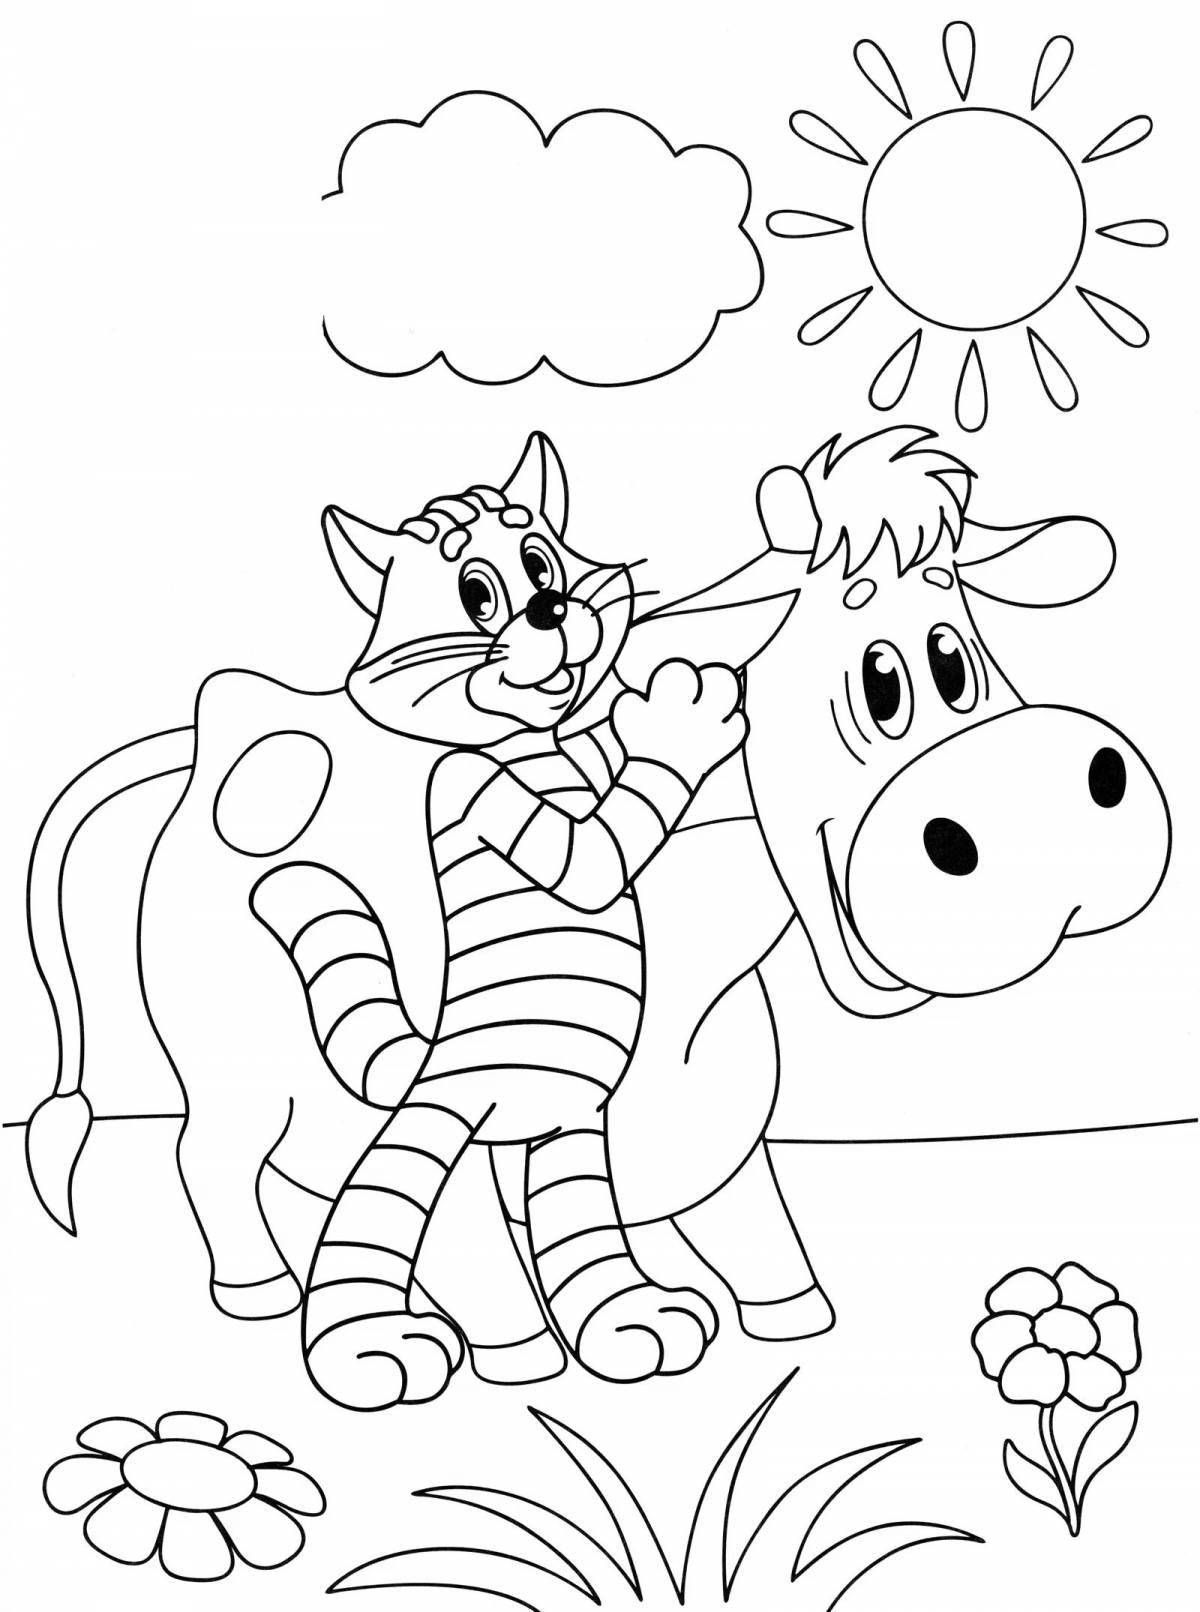 Colorful sailor skin coloring page for kids